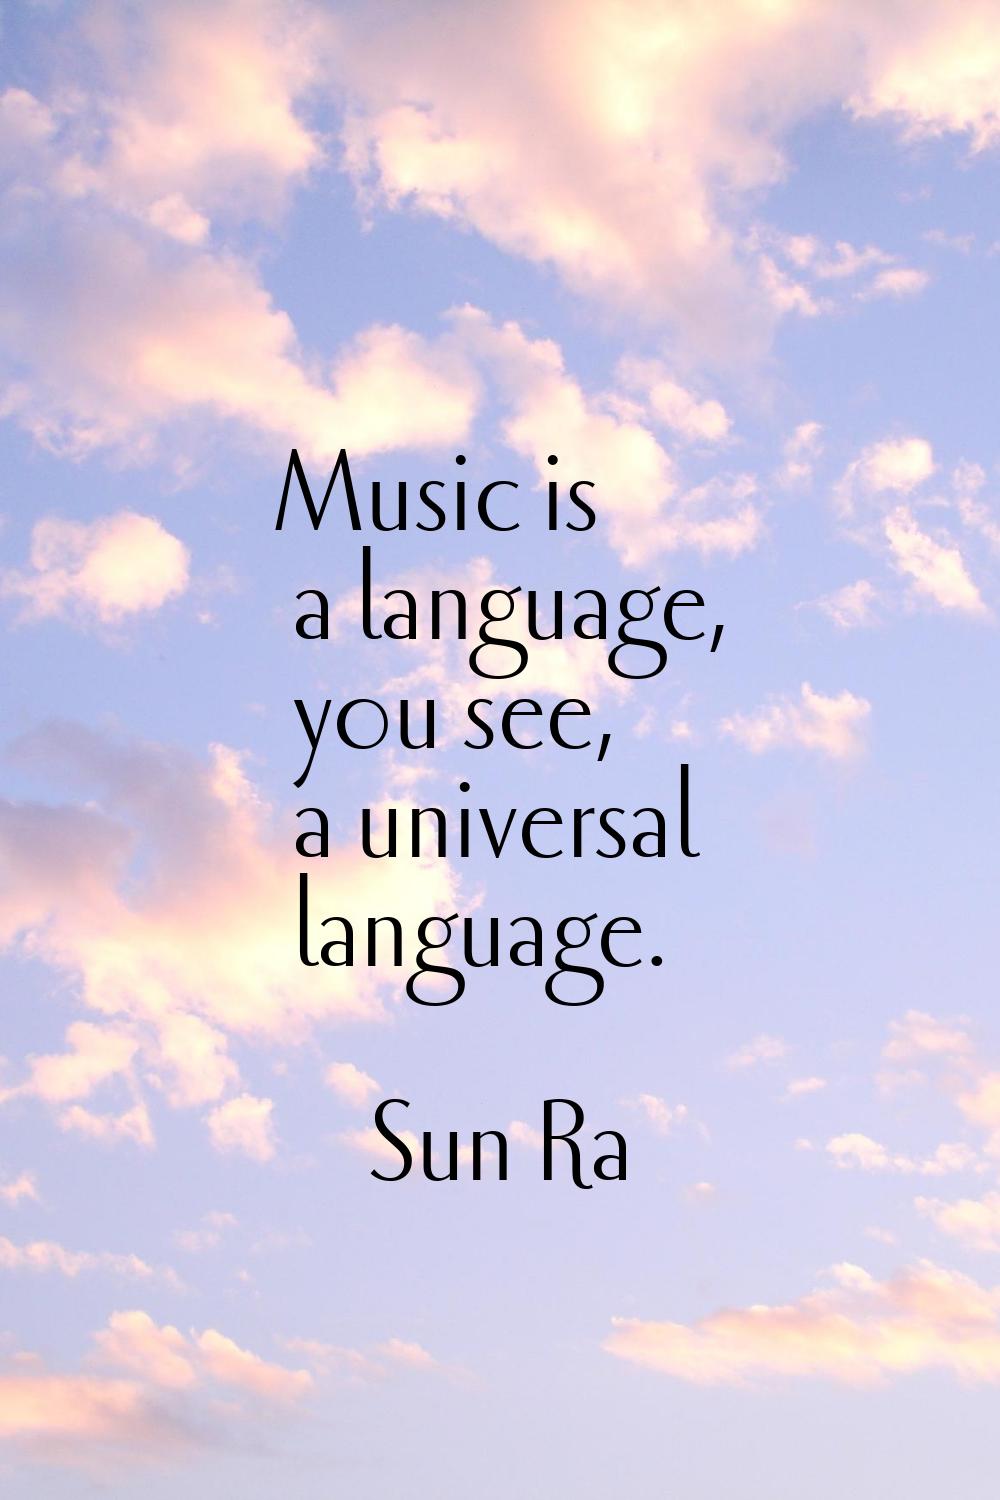 Music is a language, you see, a universal language.